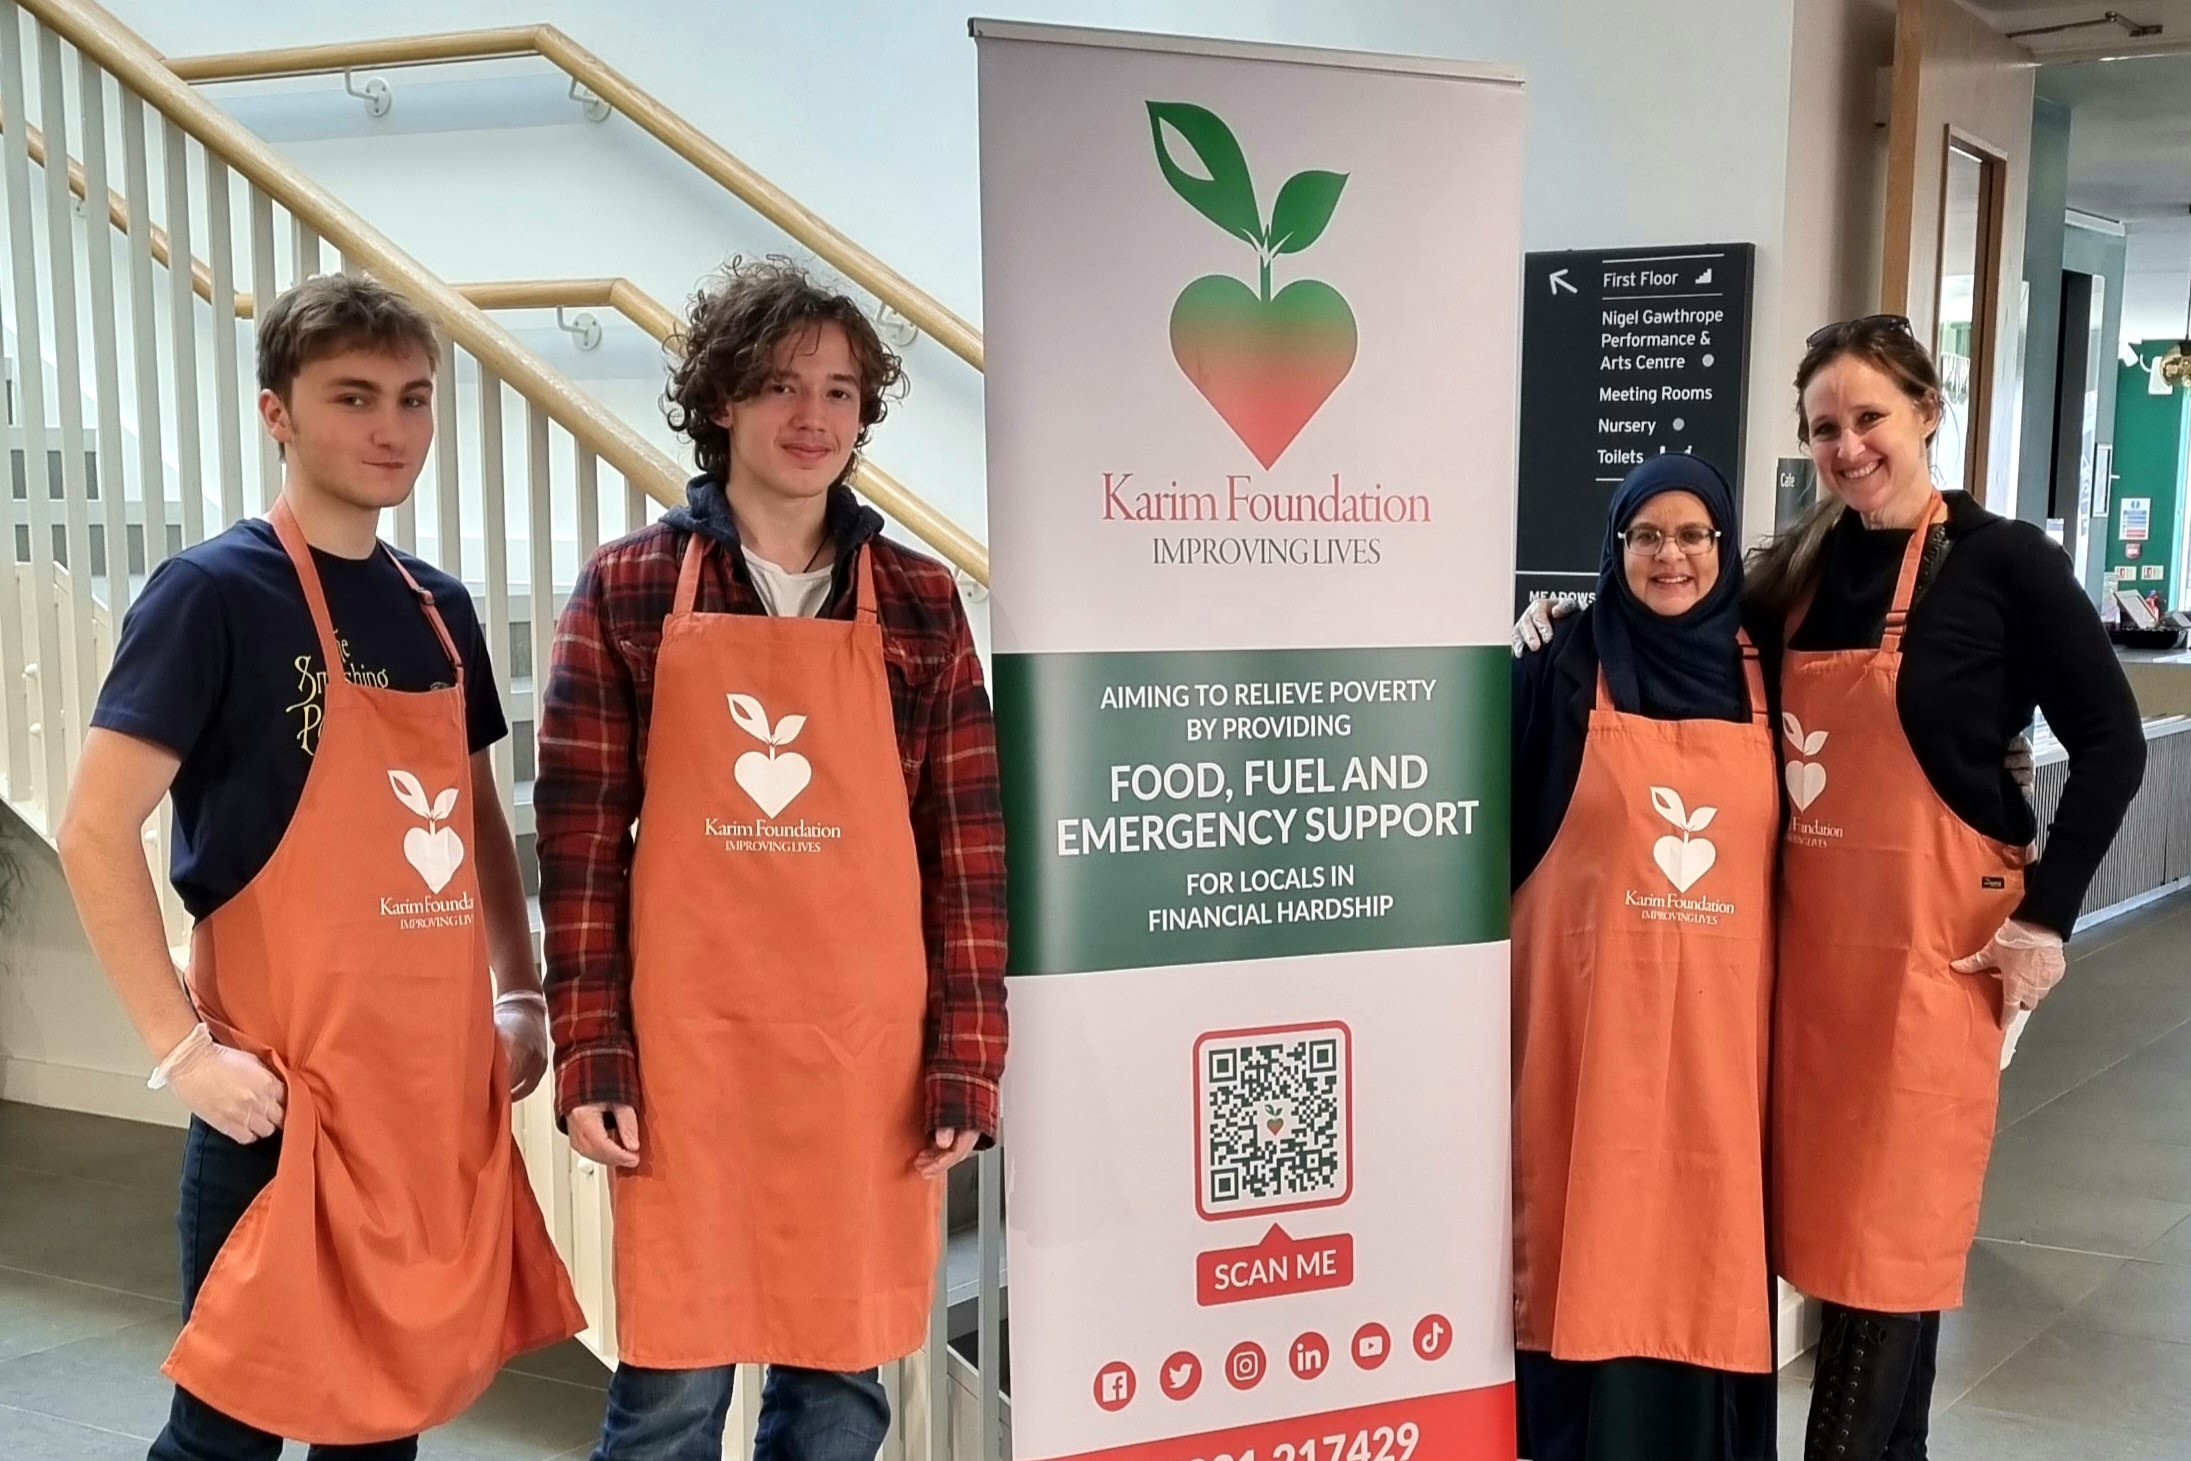 Charles (left), Matthew (second from left), Shahida (second from right) and Jeandre (right) open the doors to the North Cambridge Soup Kitchen. They are all wearing orange Karim Foundation aprons